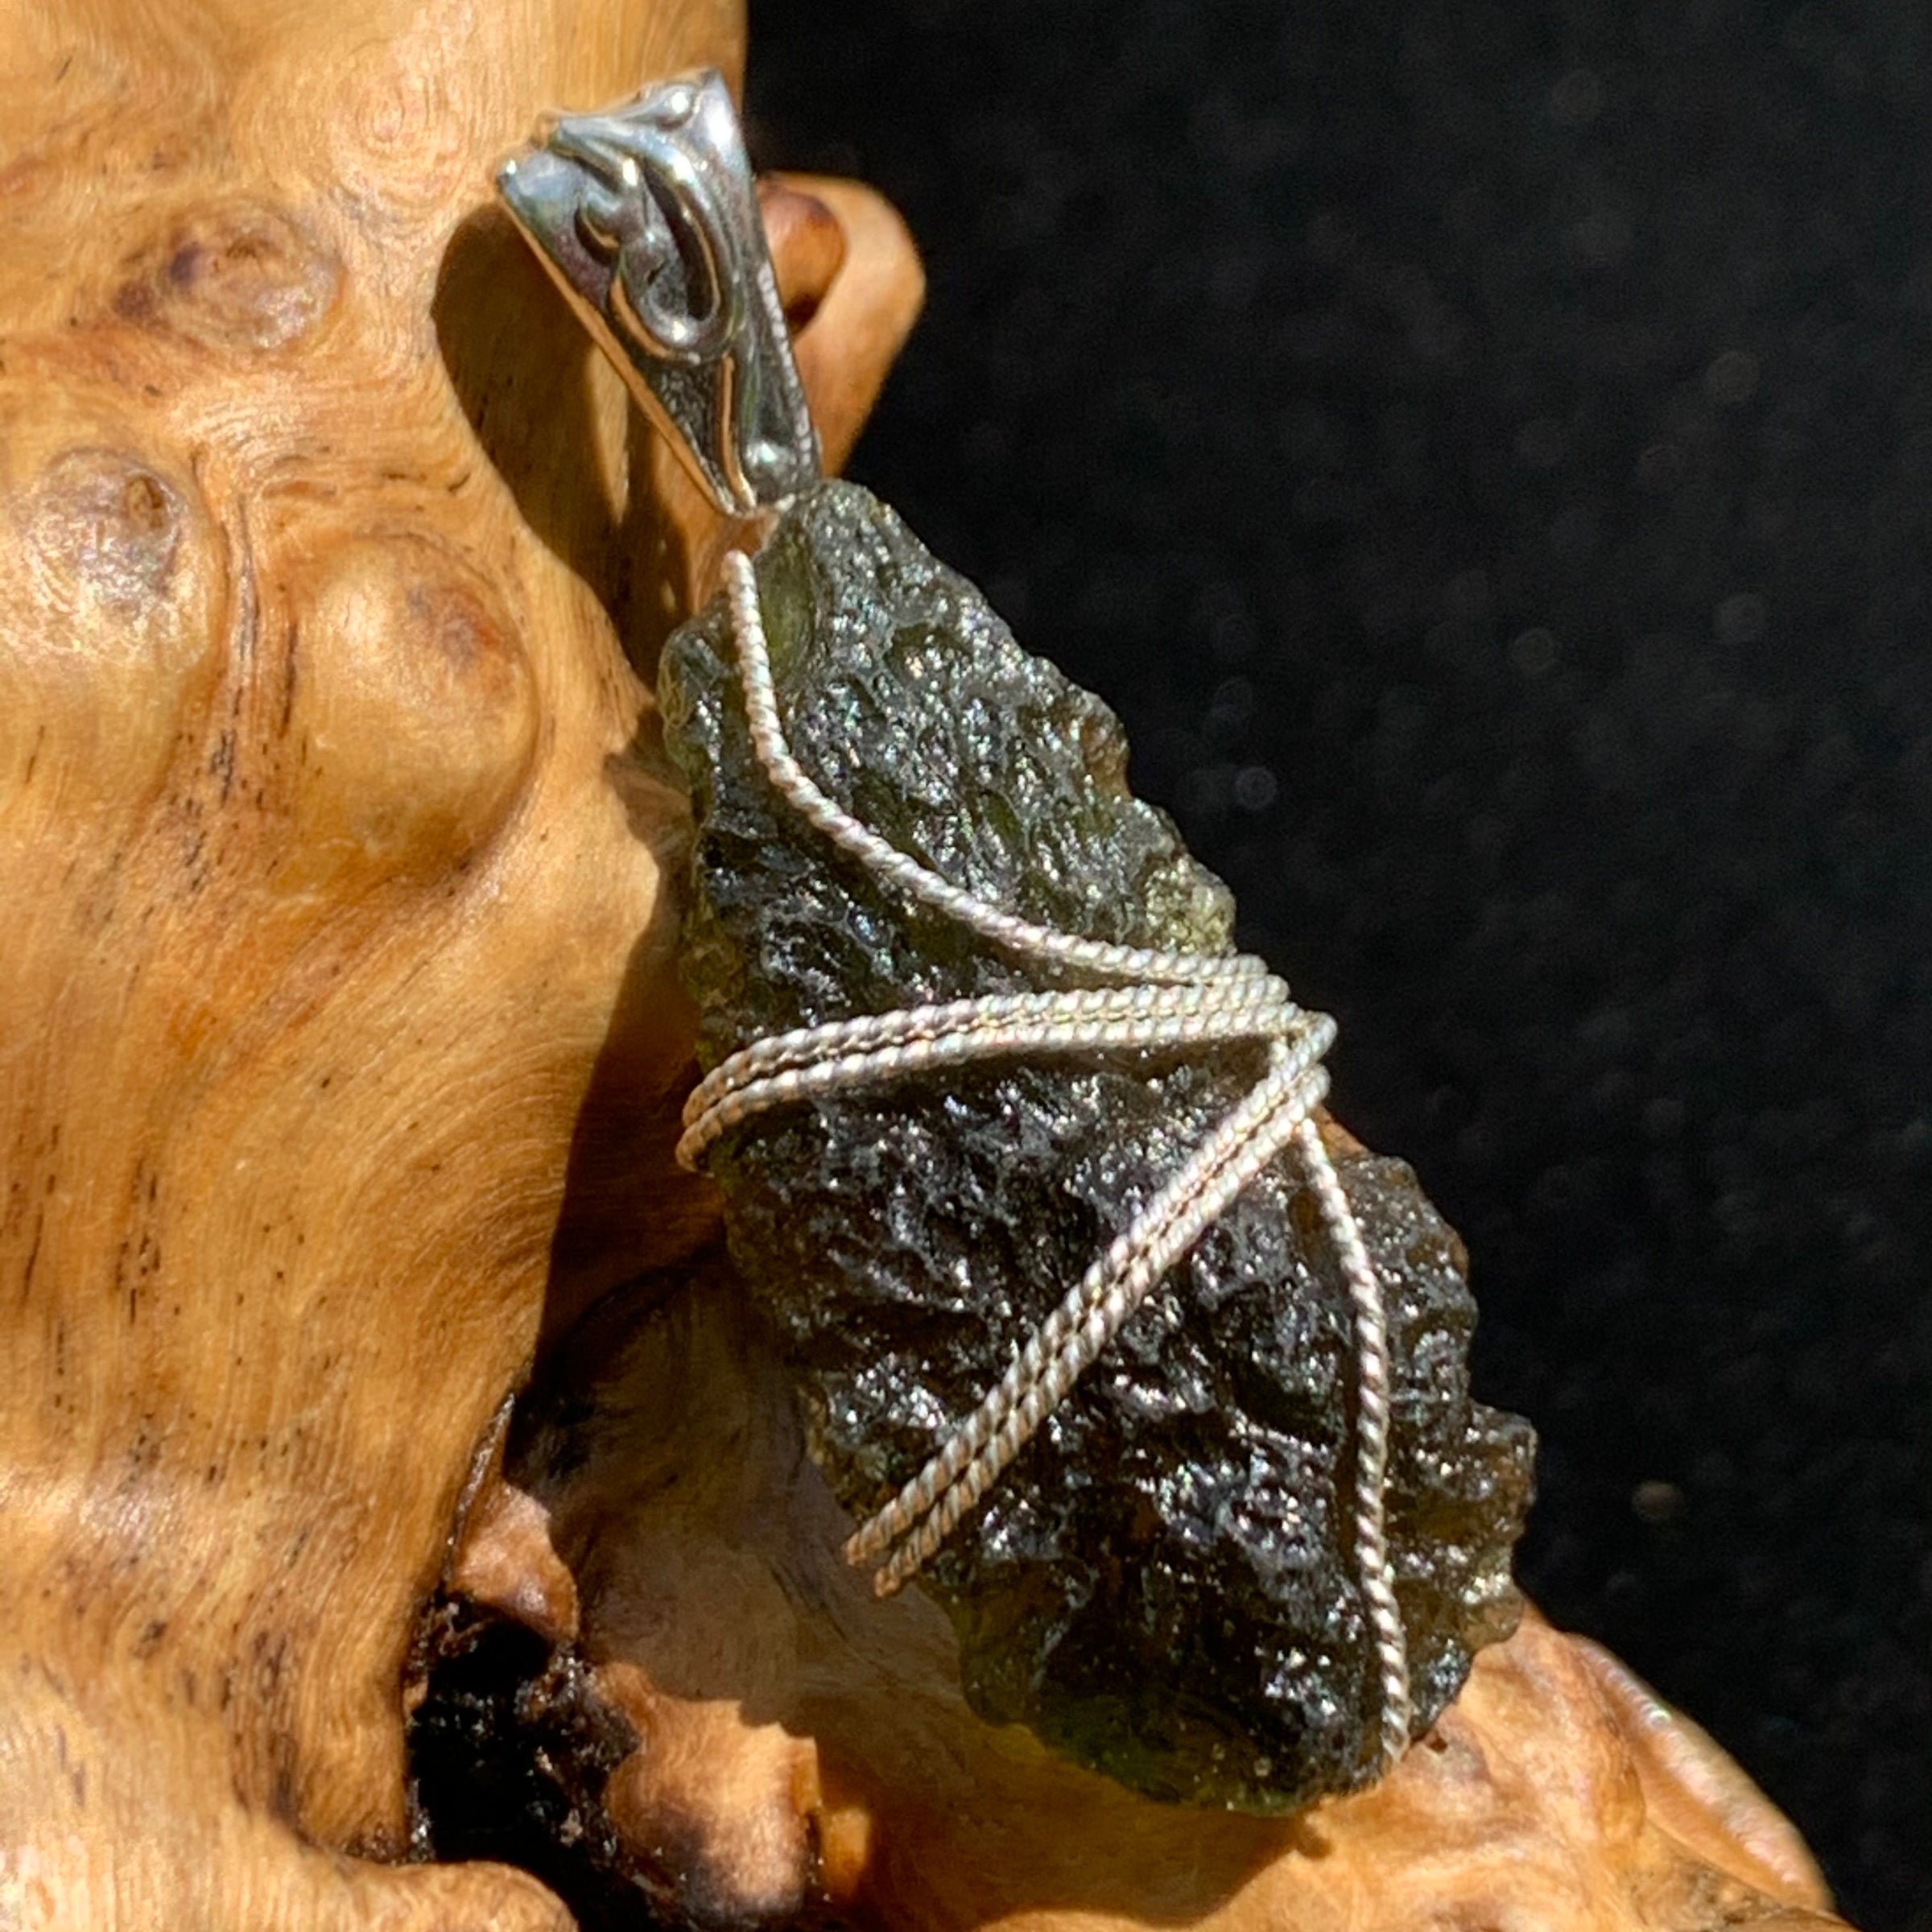 the silver wire is twisted and the moldavite has great texture